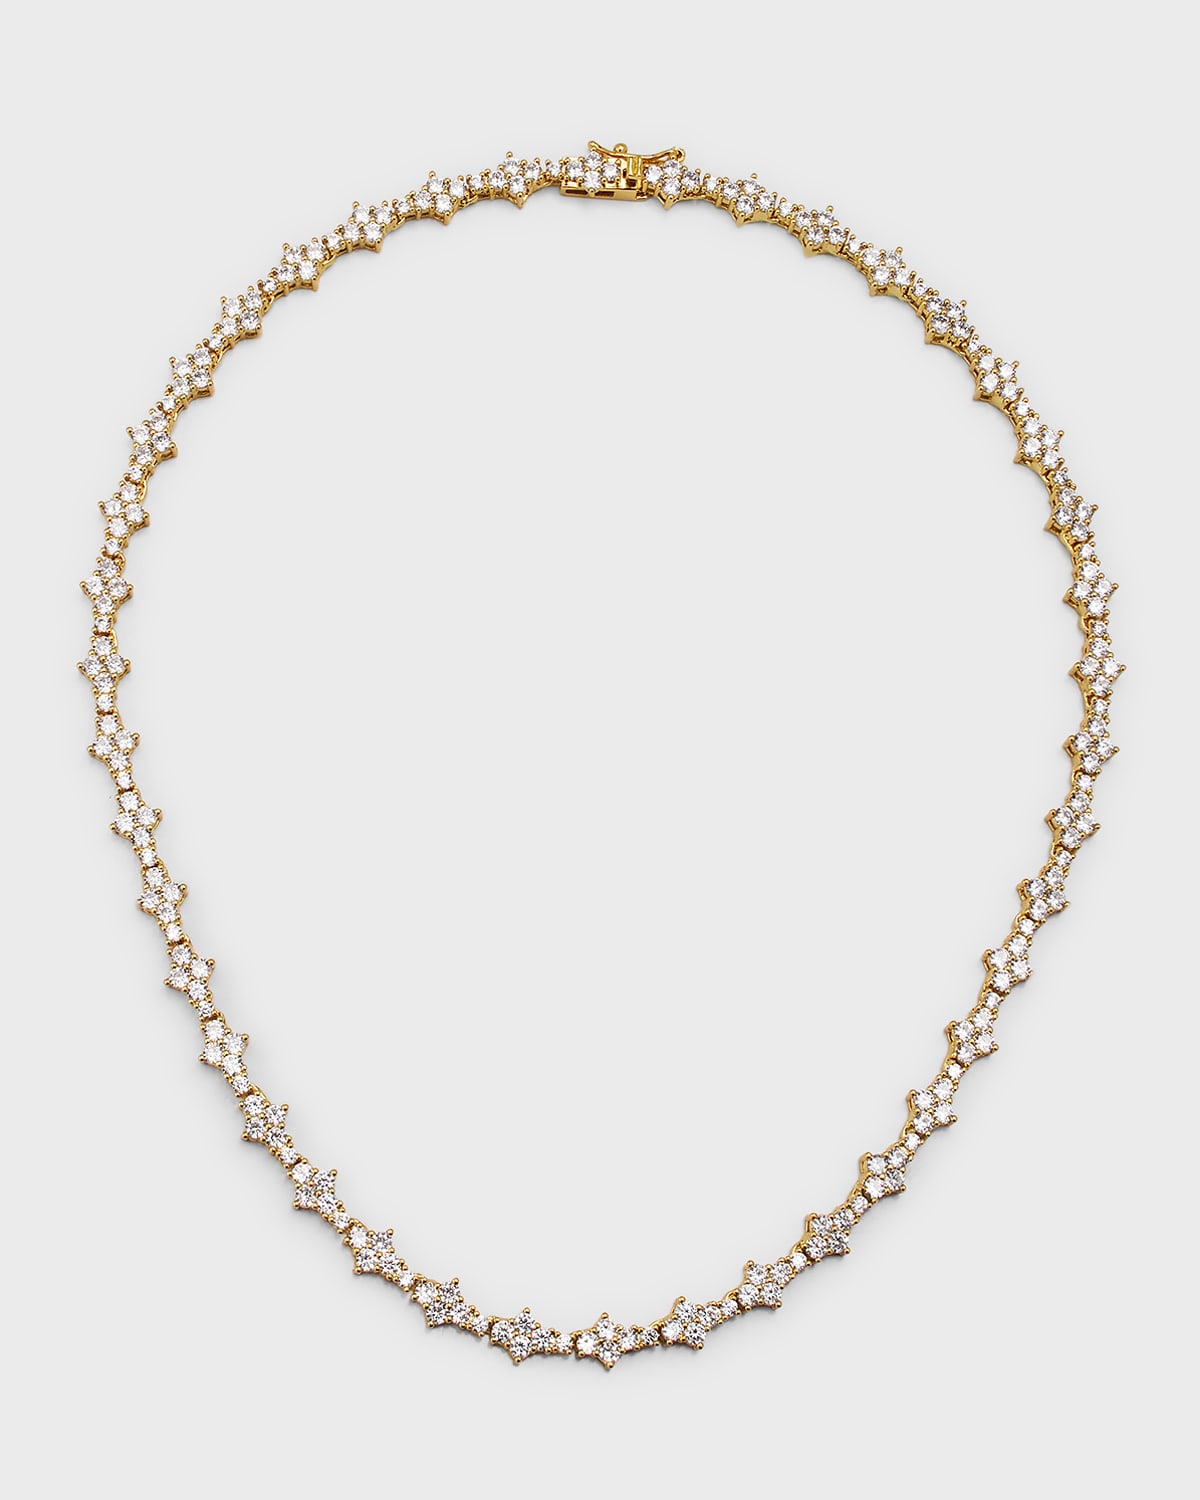 FALLON Naples Stacked Cubic Zirconia Necklace